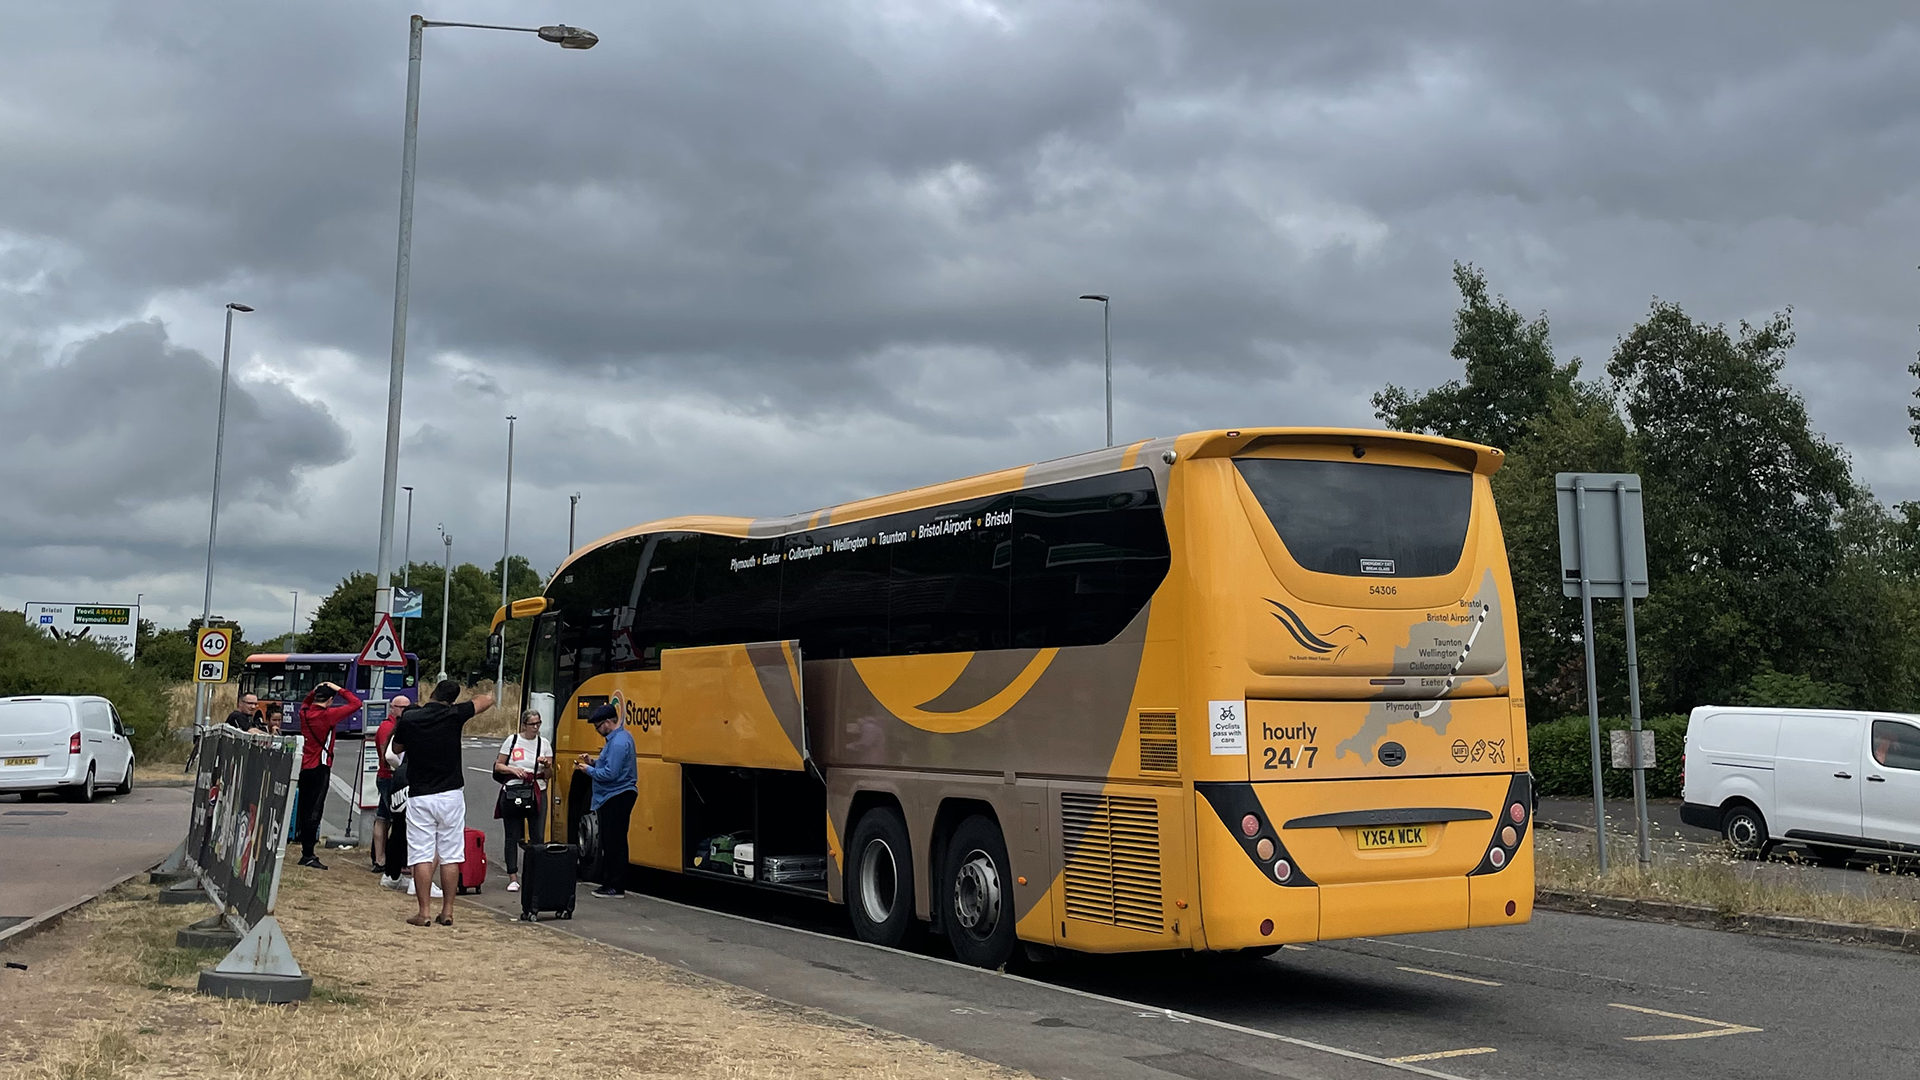 The Falcon bus from Taunton to Bristol Airport